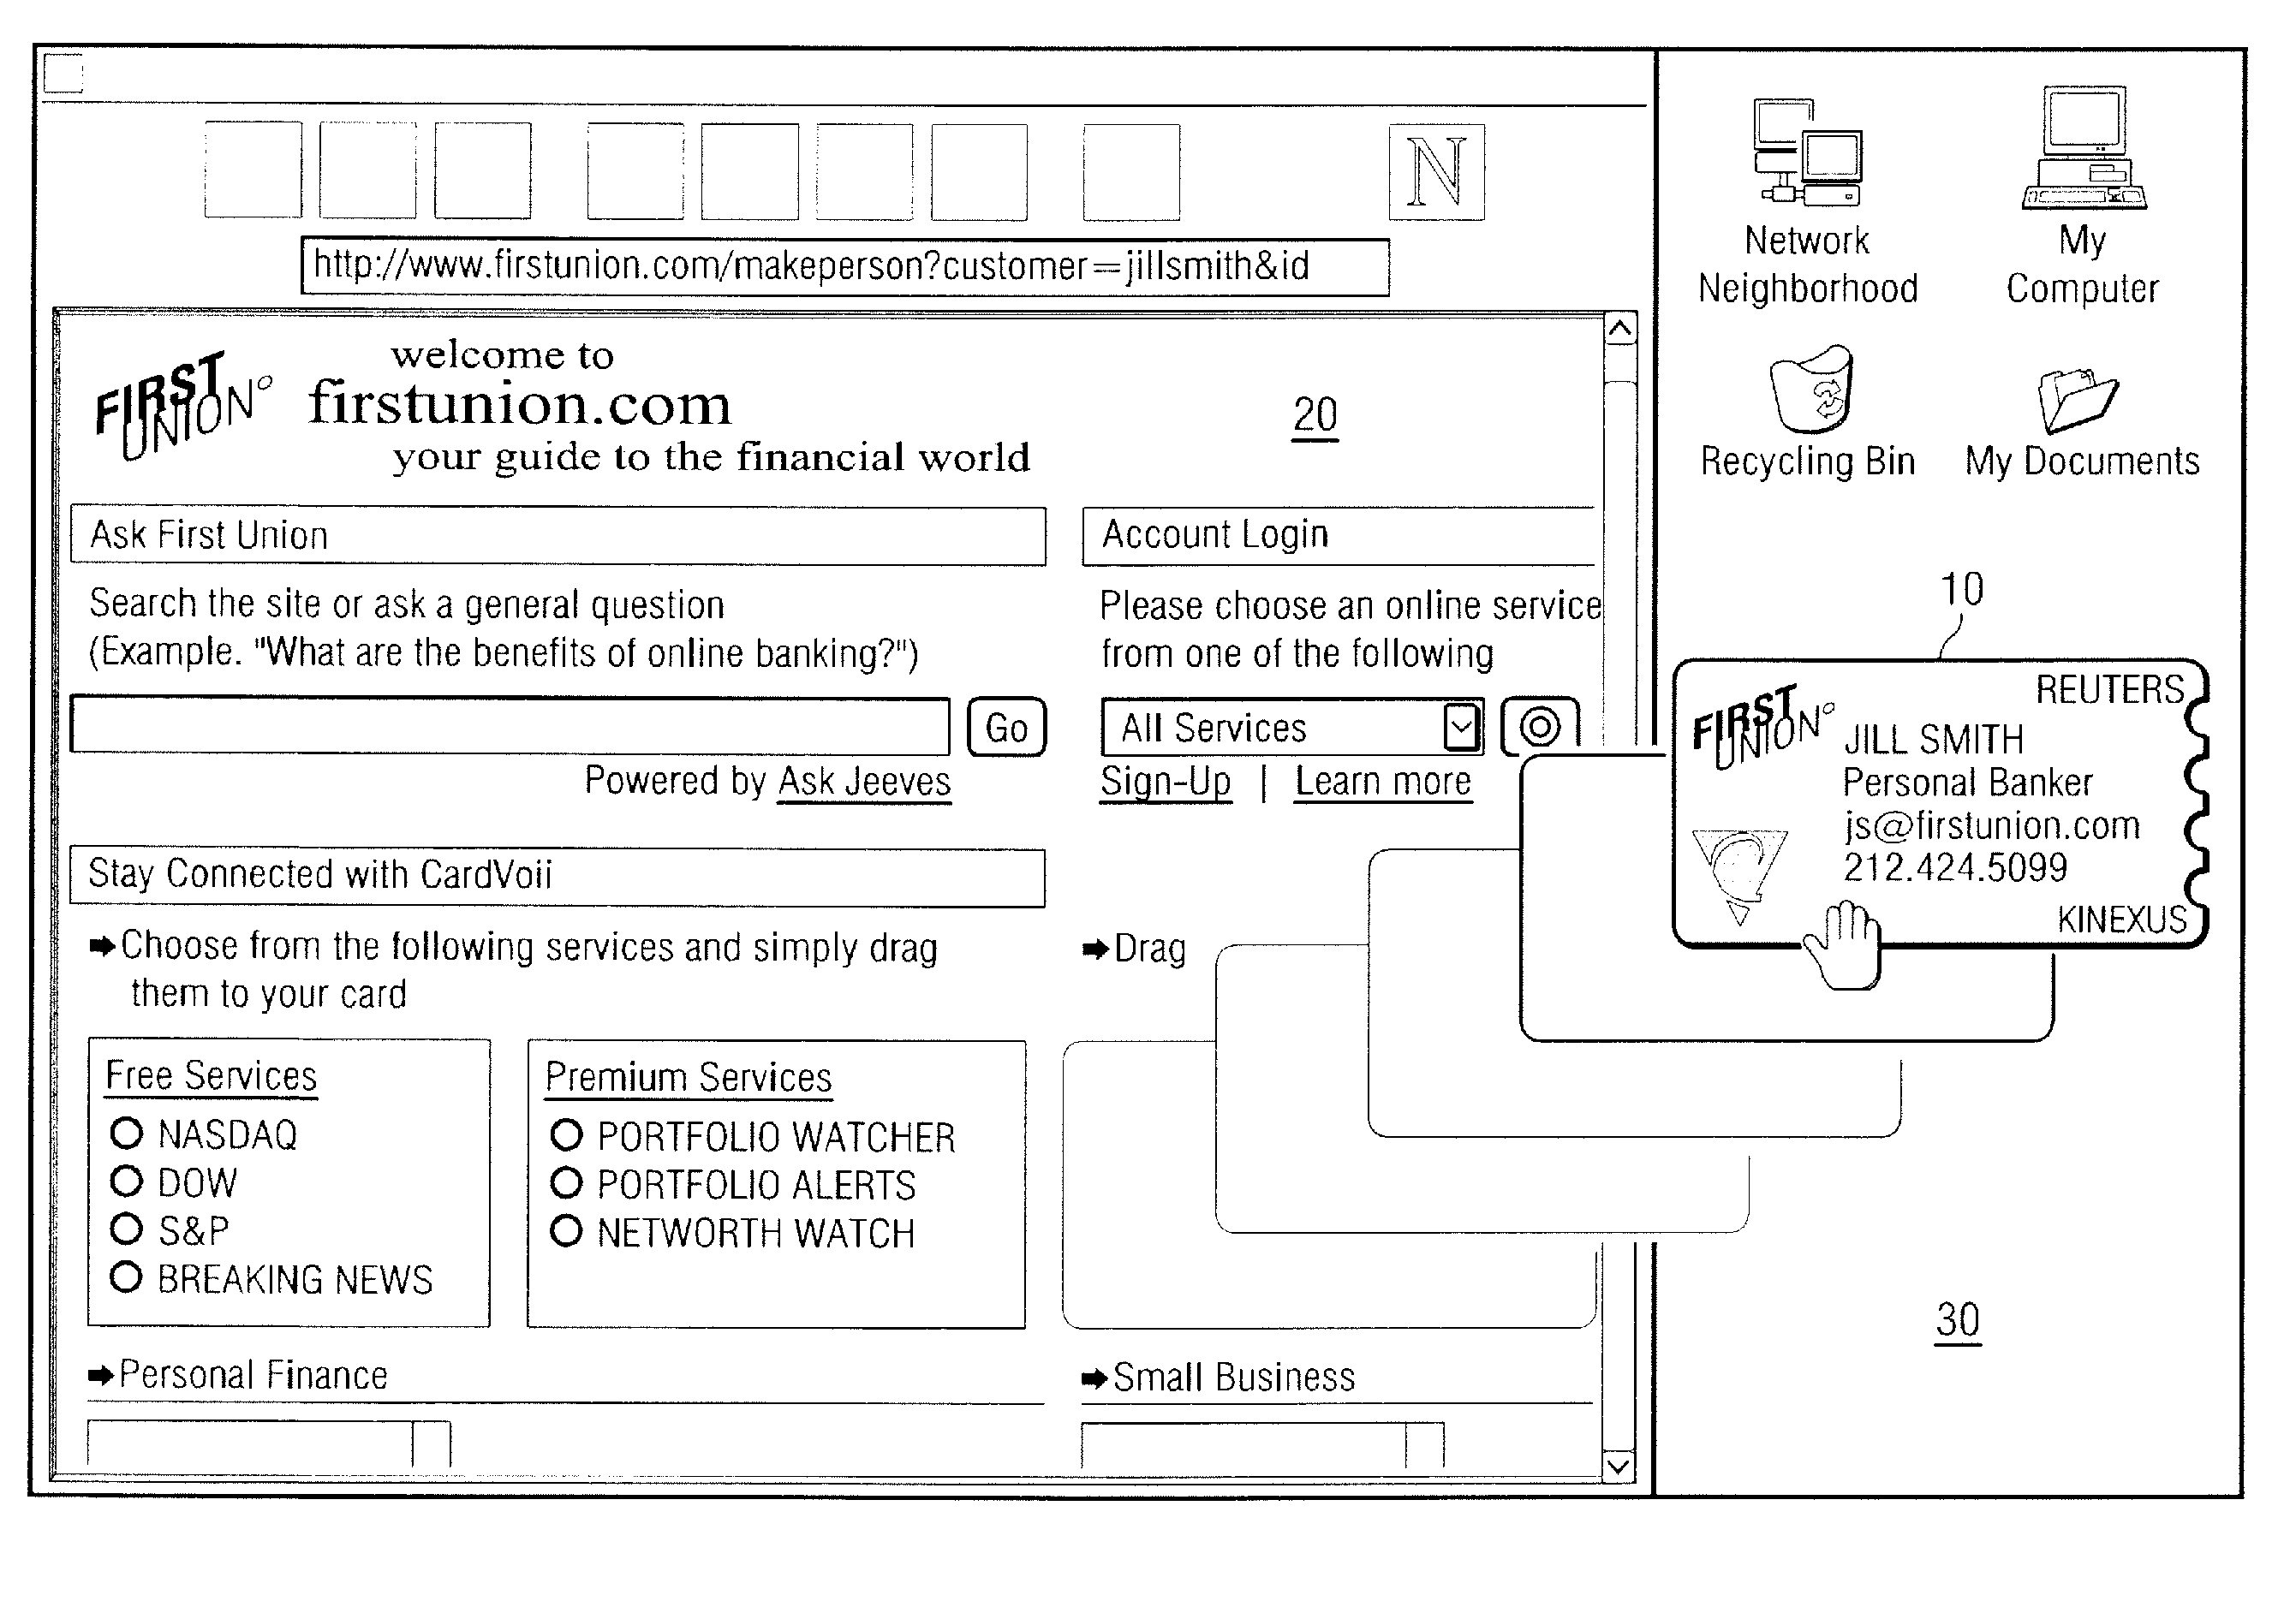 Architecture for a system of portable information agents